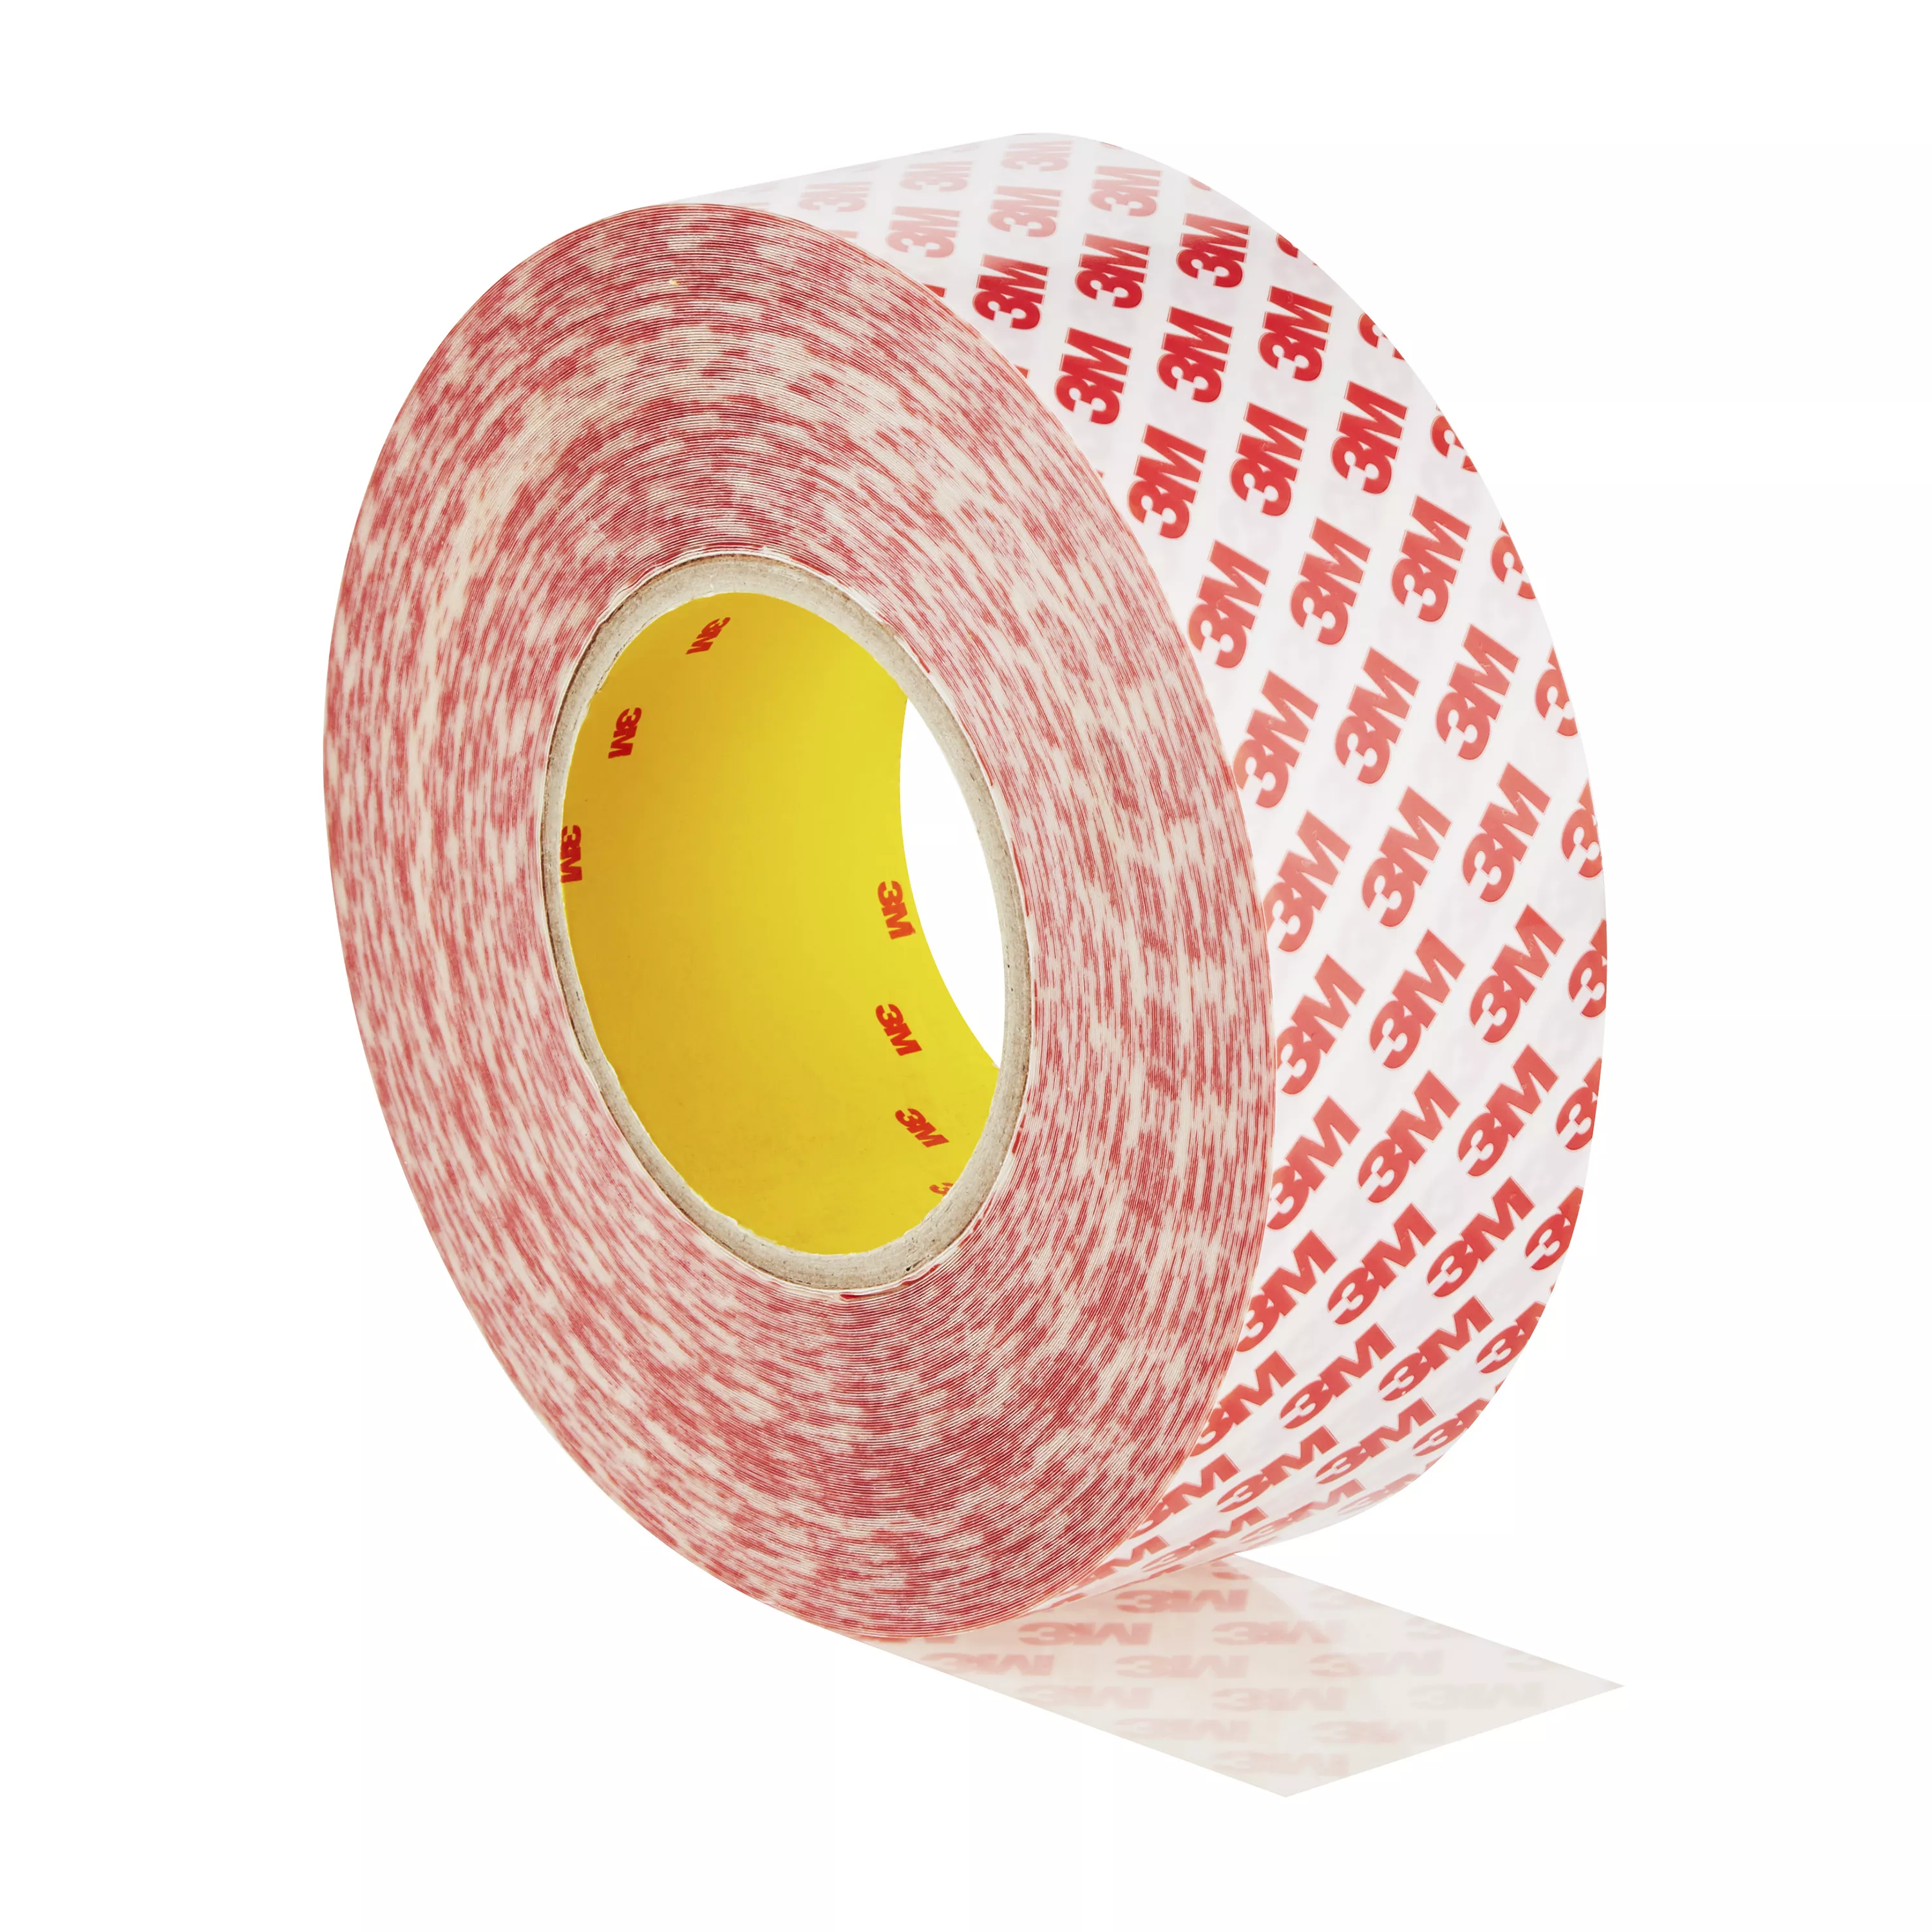 Product Number GPT-020 | 3M™ Double Coated Tape Paper Liner GPT-020